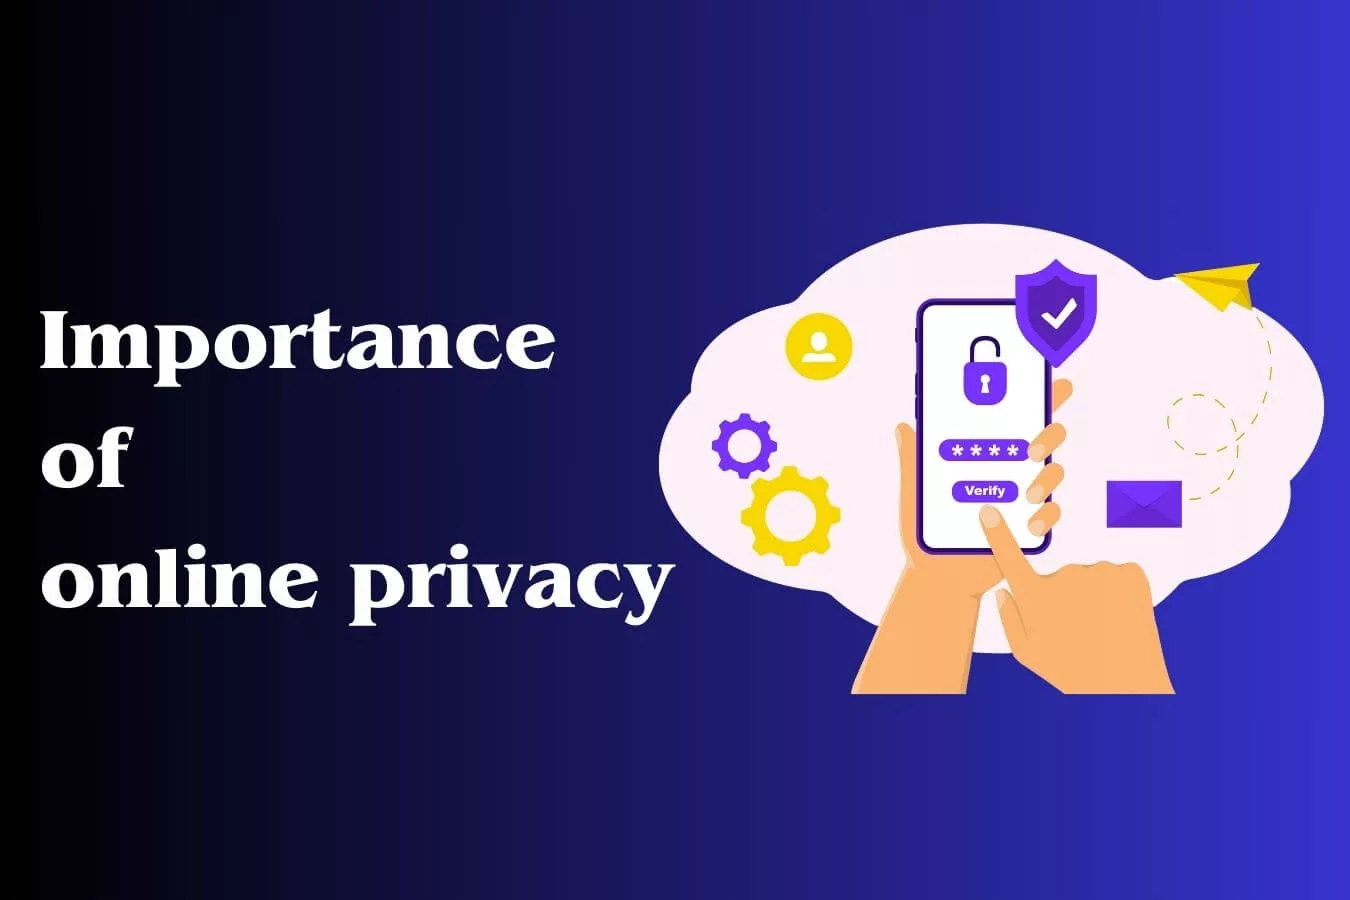 Importance of online privacy